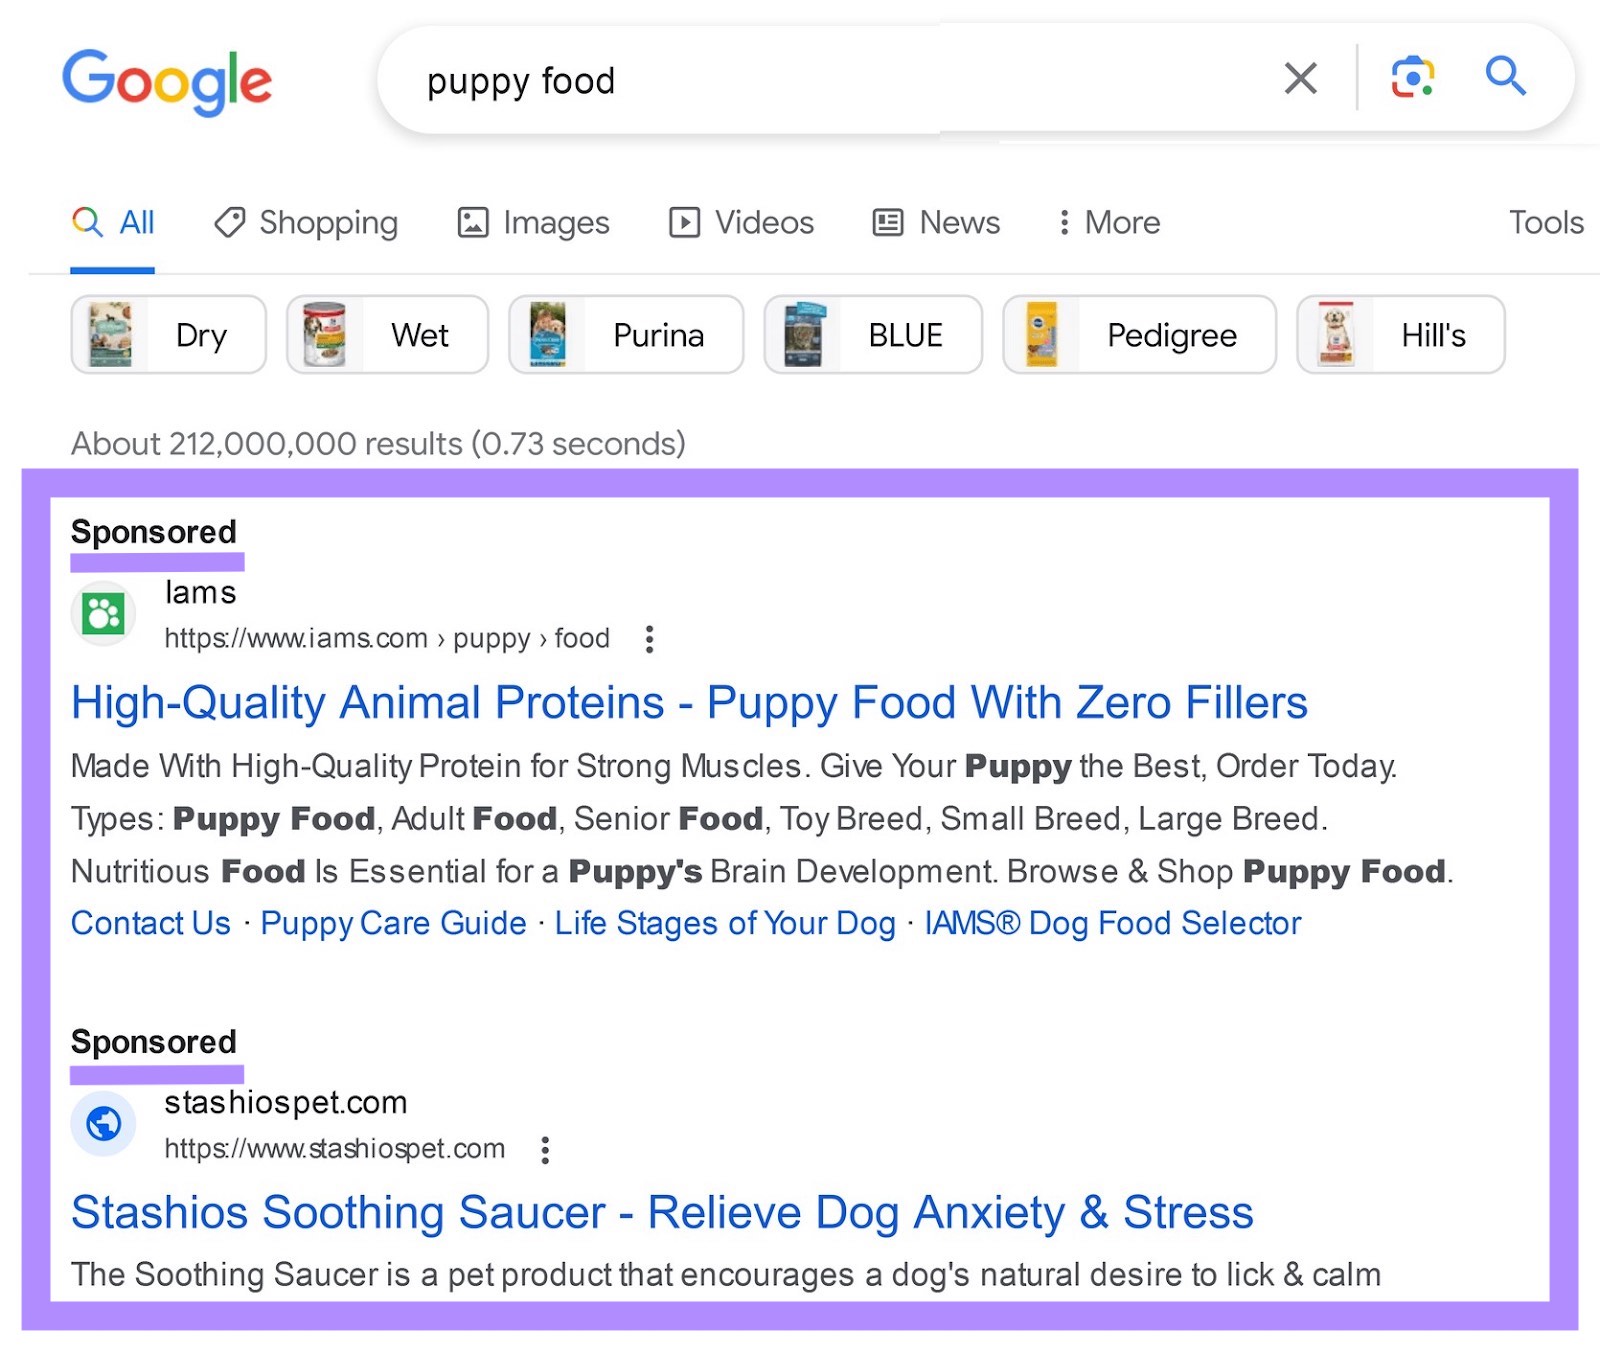 A hunt  advertisement  connected  Google SERP for "puppy food" query